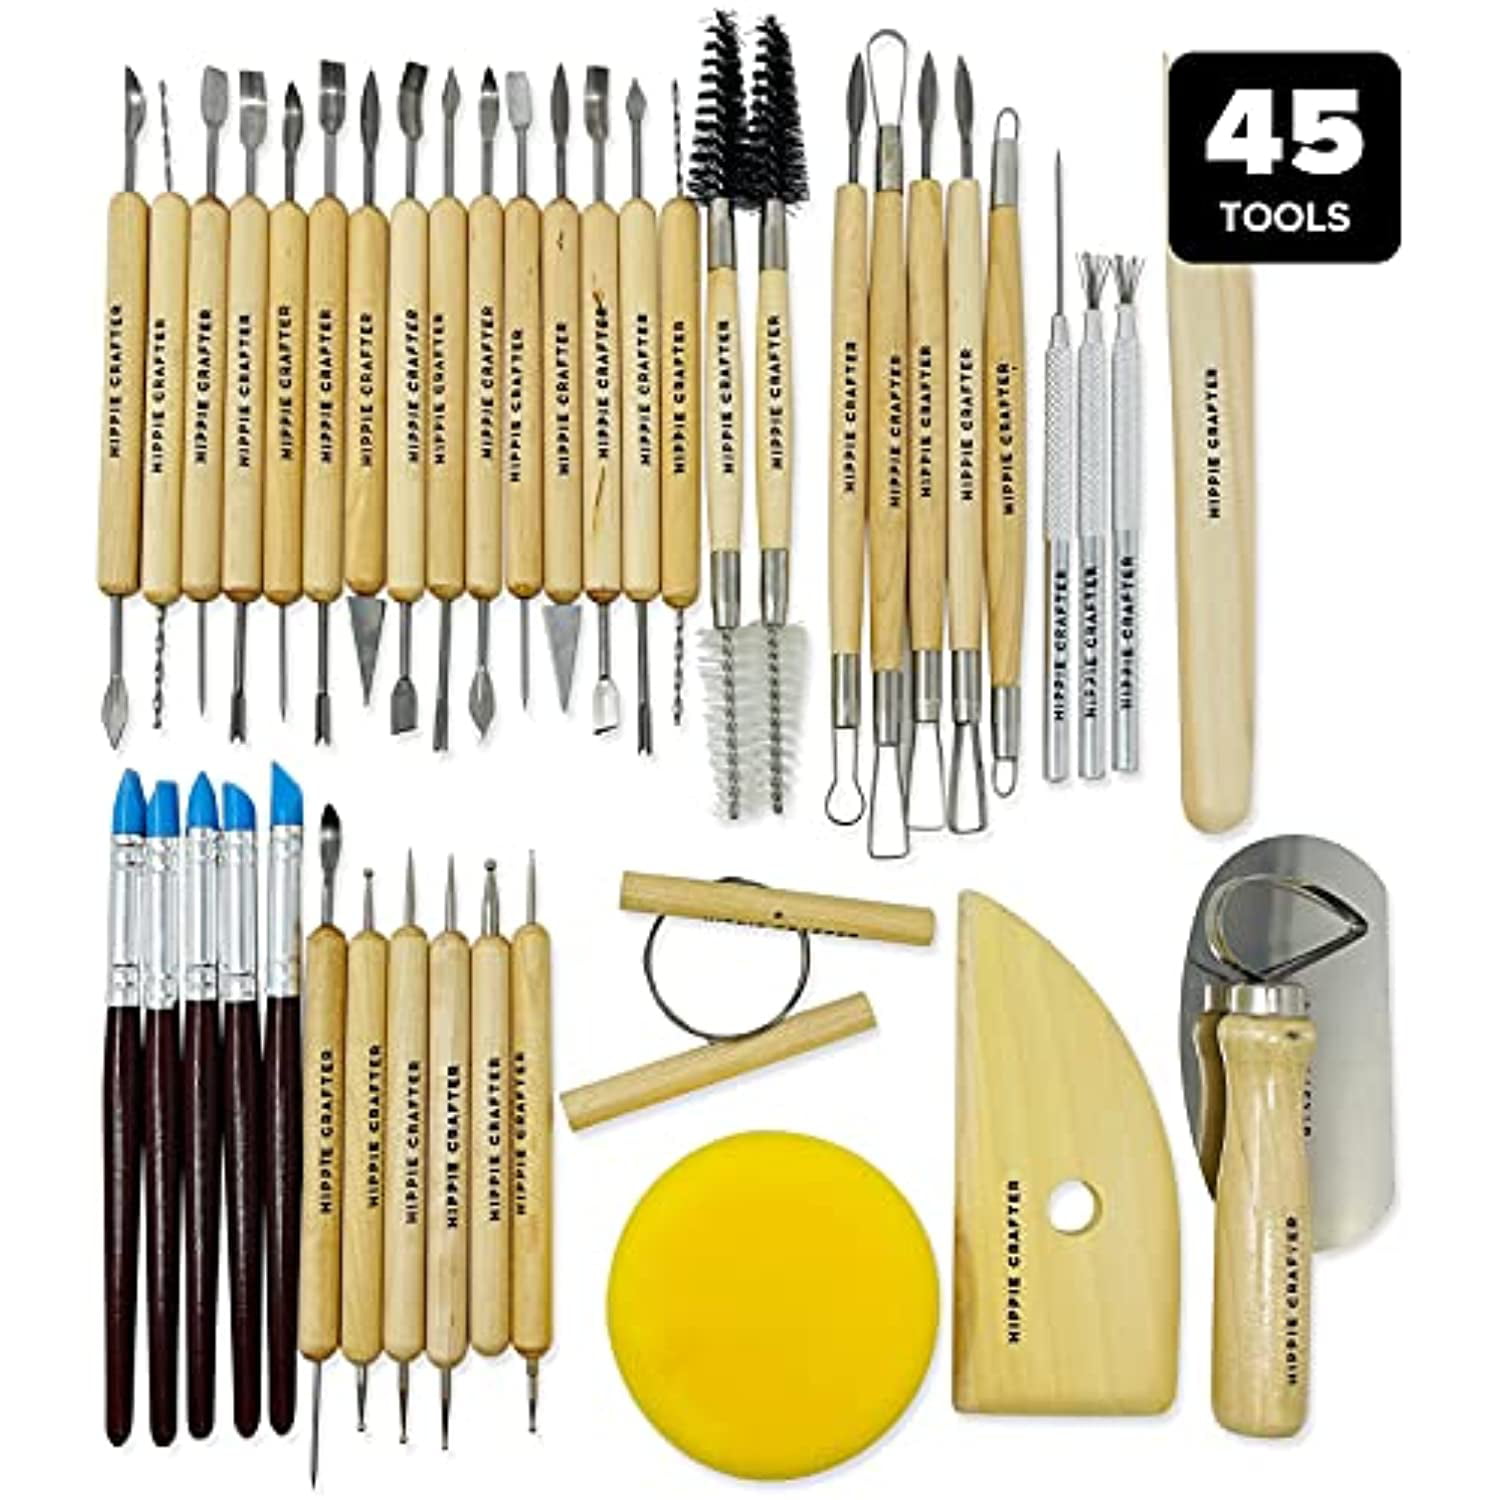 Polymer Clay Tools Set for Modeling Sculpting Carving Tool Kit - 45 Pieces  